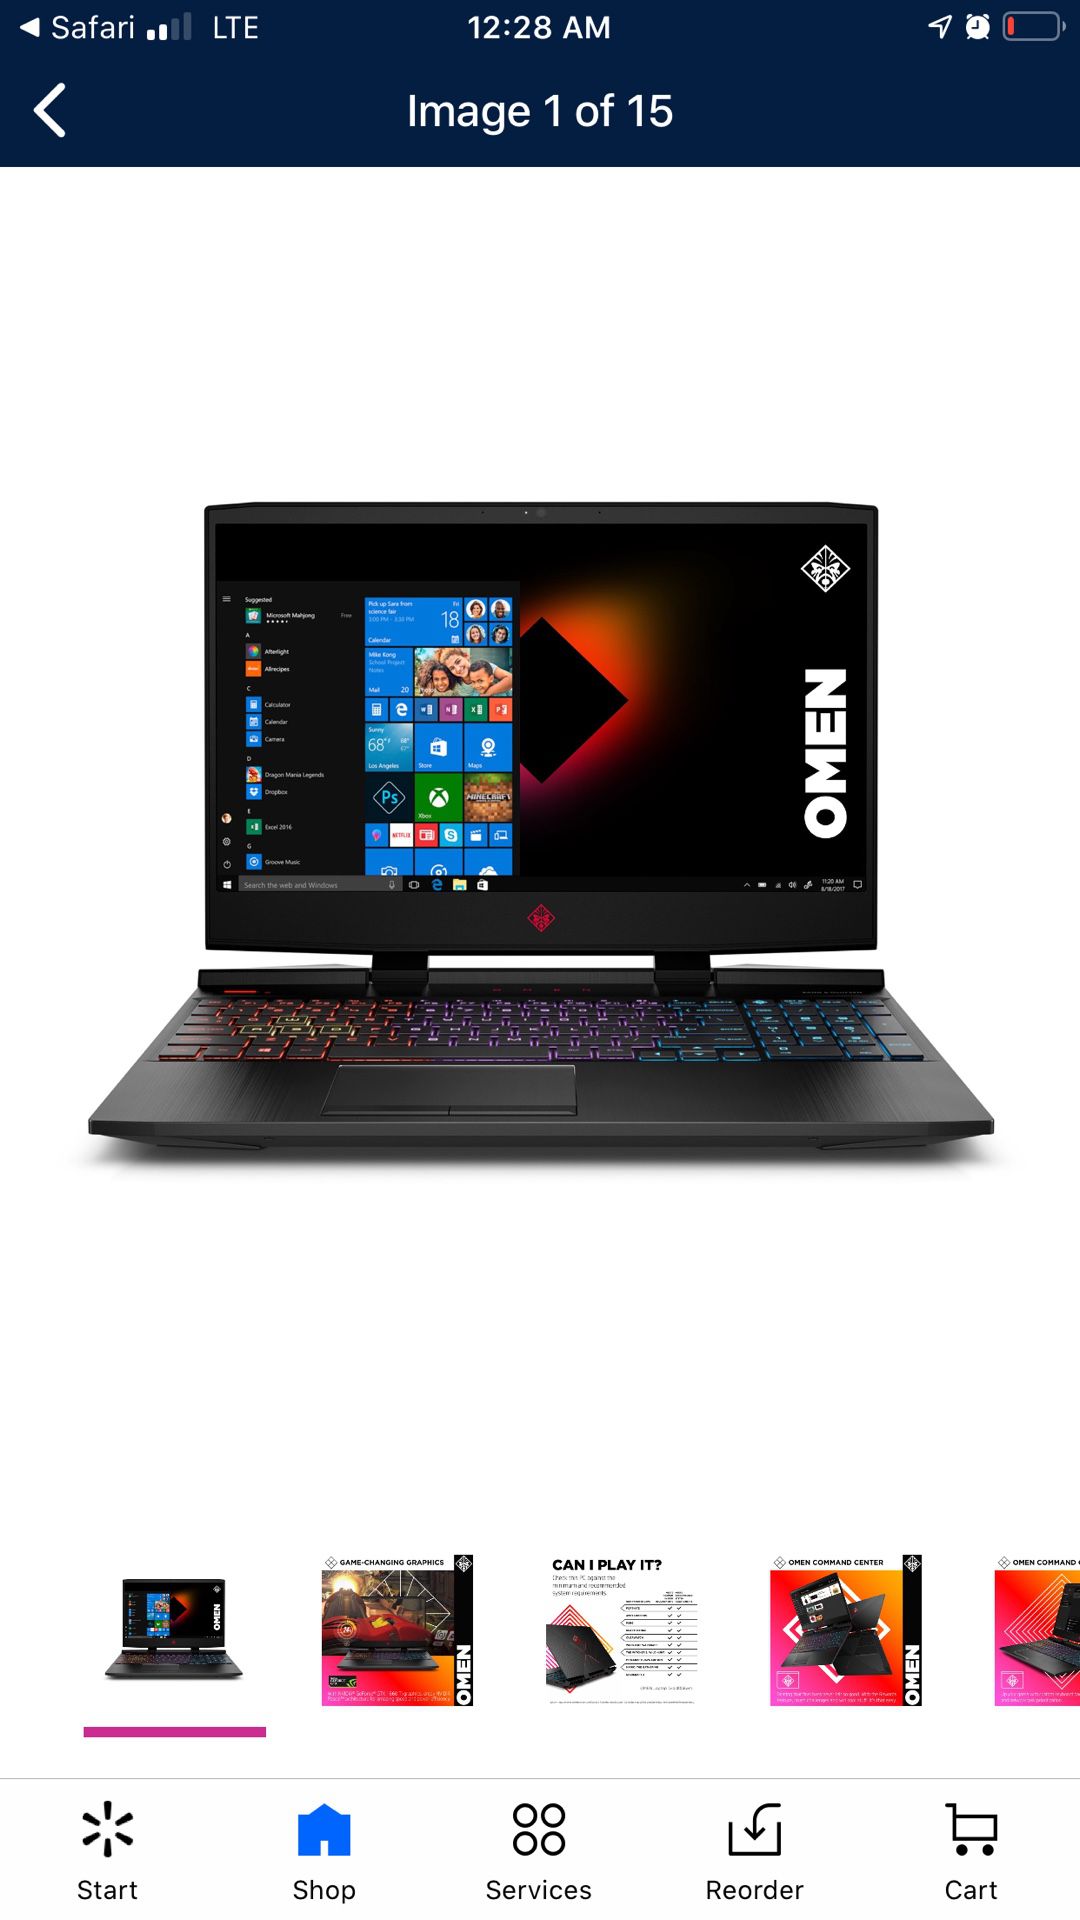 Hp omen i7 fast blazing laptop with super speed. Fairly new only 15 hours of use time.